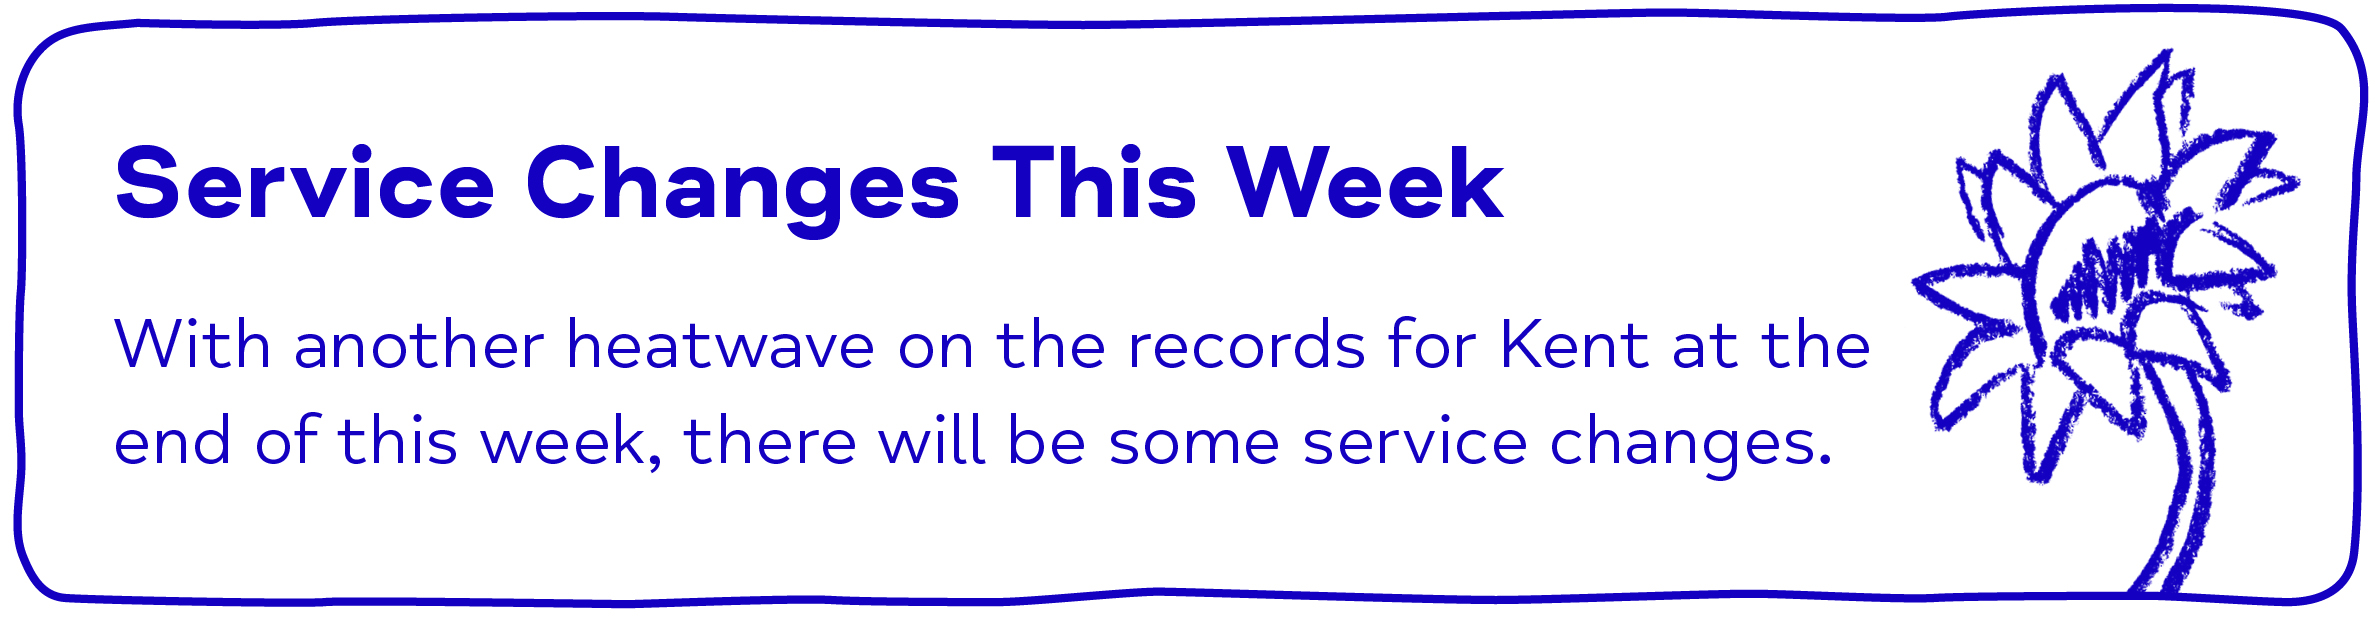 Service Changes This Week With another heatwave on the records for Kent at the end of this week, there will be some service changes.